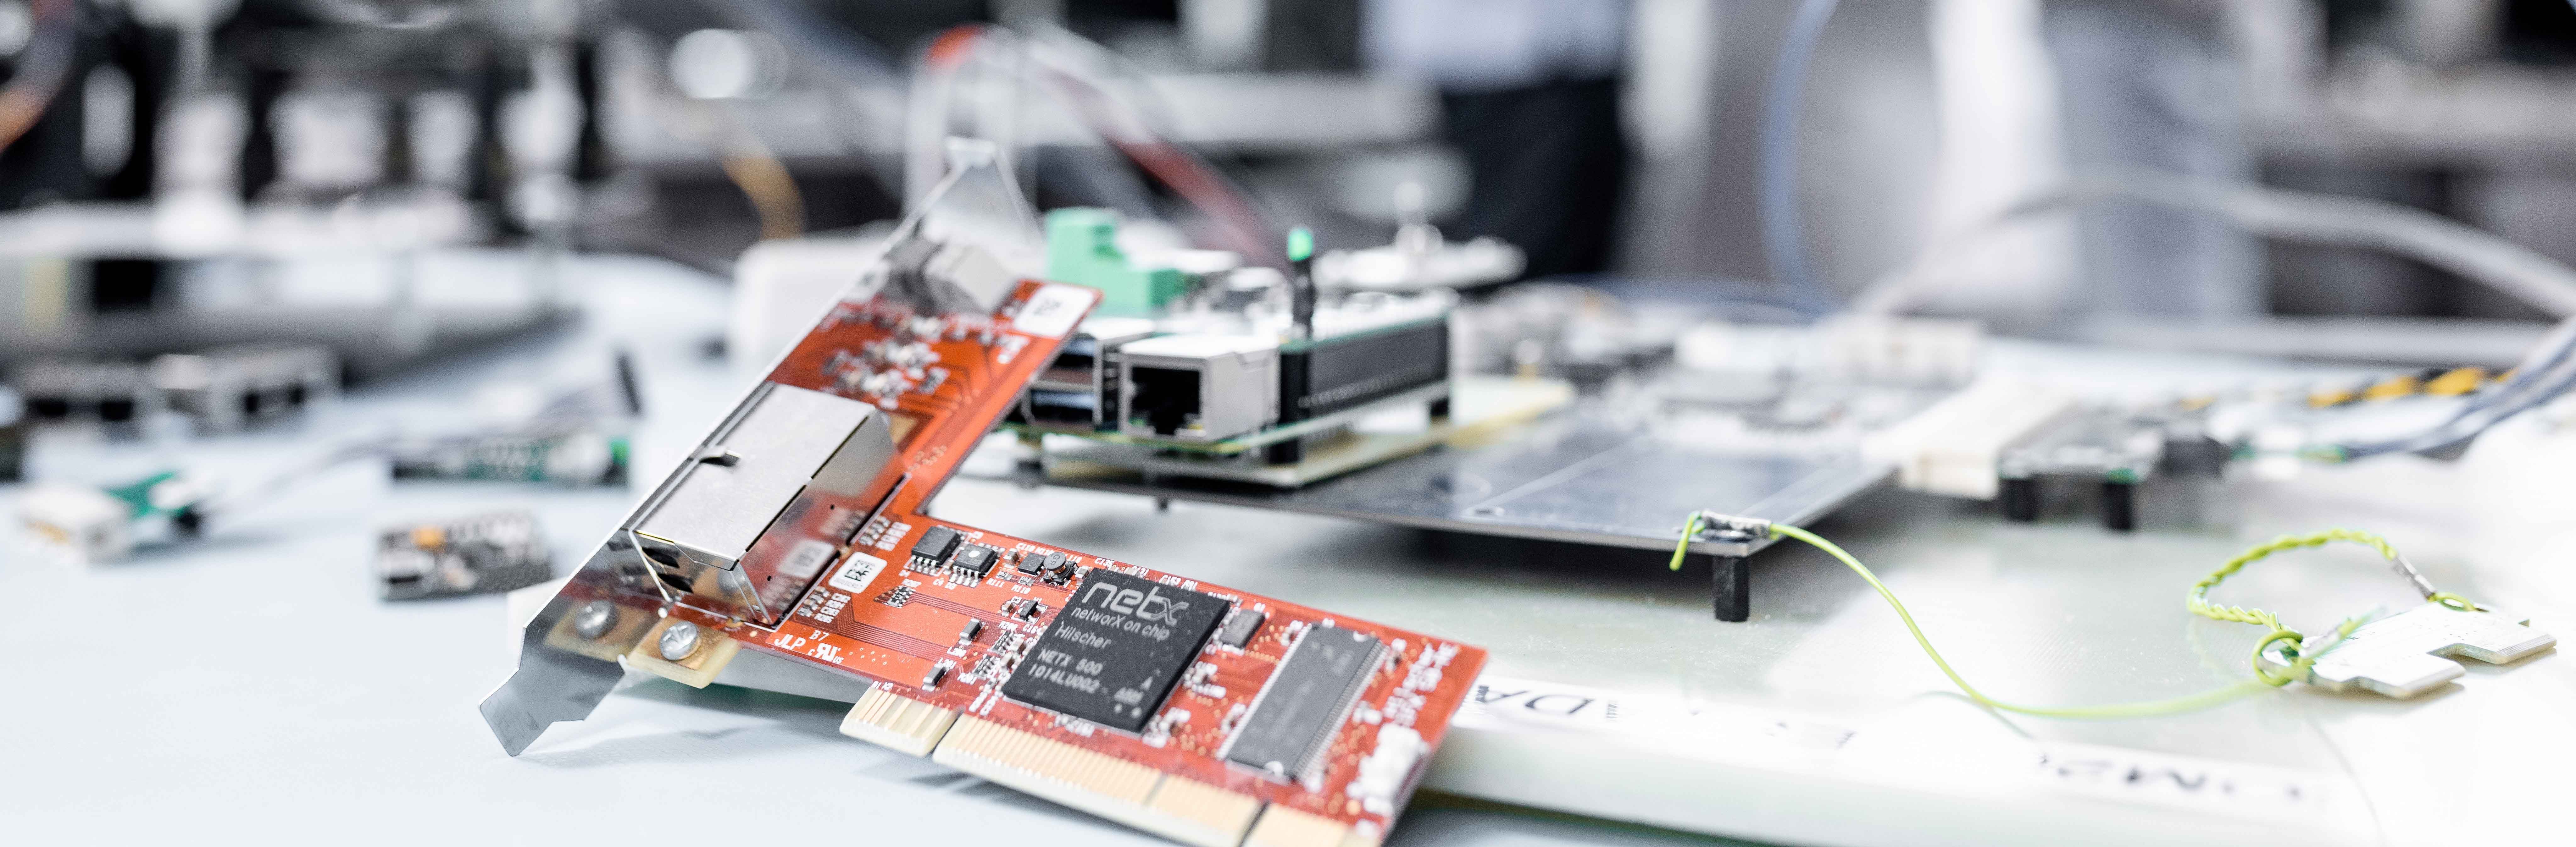 A cifX PC card with red PCB lays in the foreground surrounded by network cables and interfaces. Out of focus in the background you can see three people in a discussion 